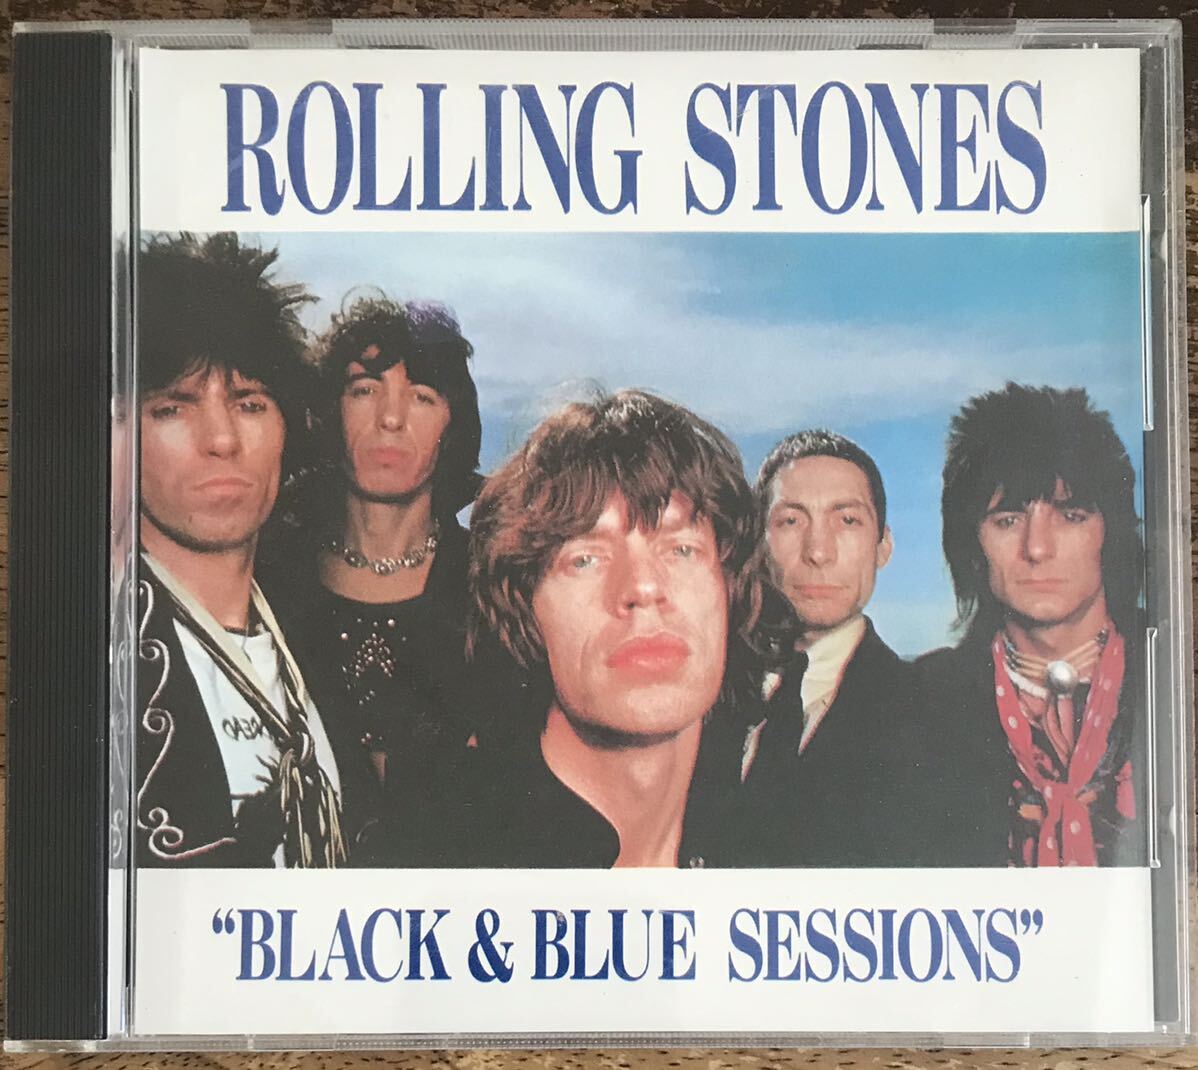 The Rolling Stones / ローリングストーンズ / Black & Blue Sessions / 1CD / Pressed CD / “Black & Blue” Studio Outtakes & Sessions_画像1